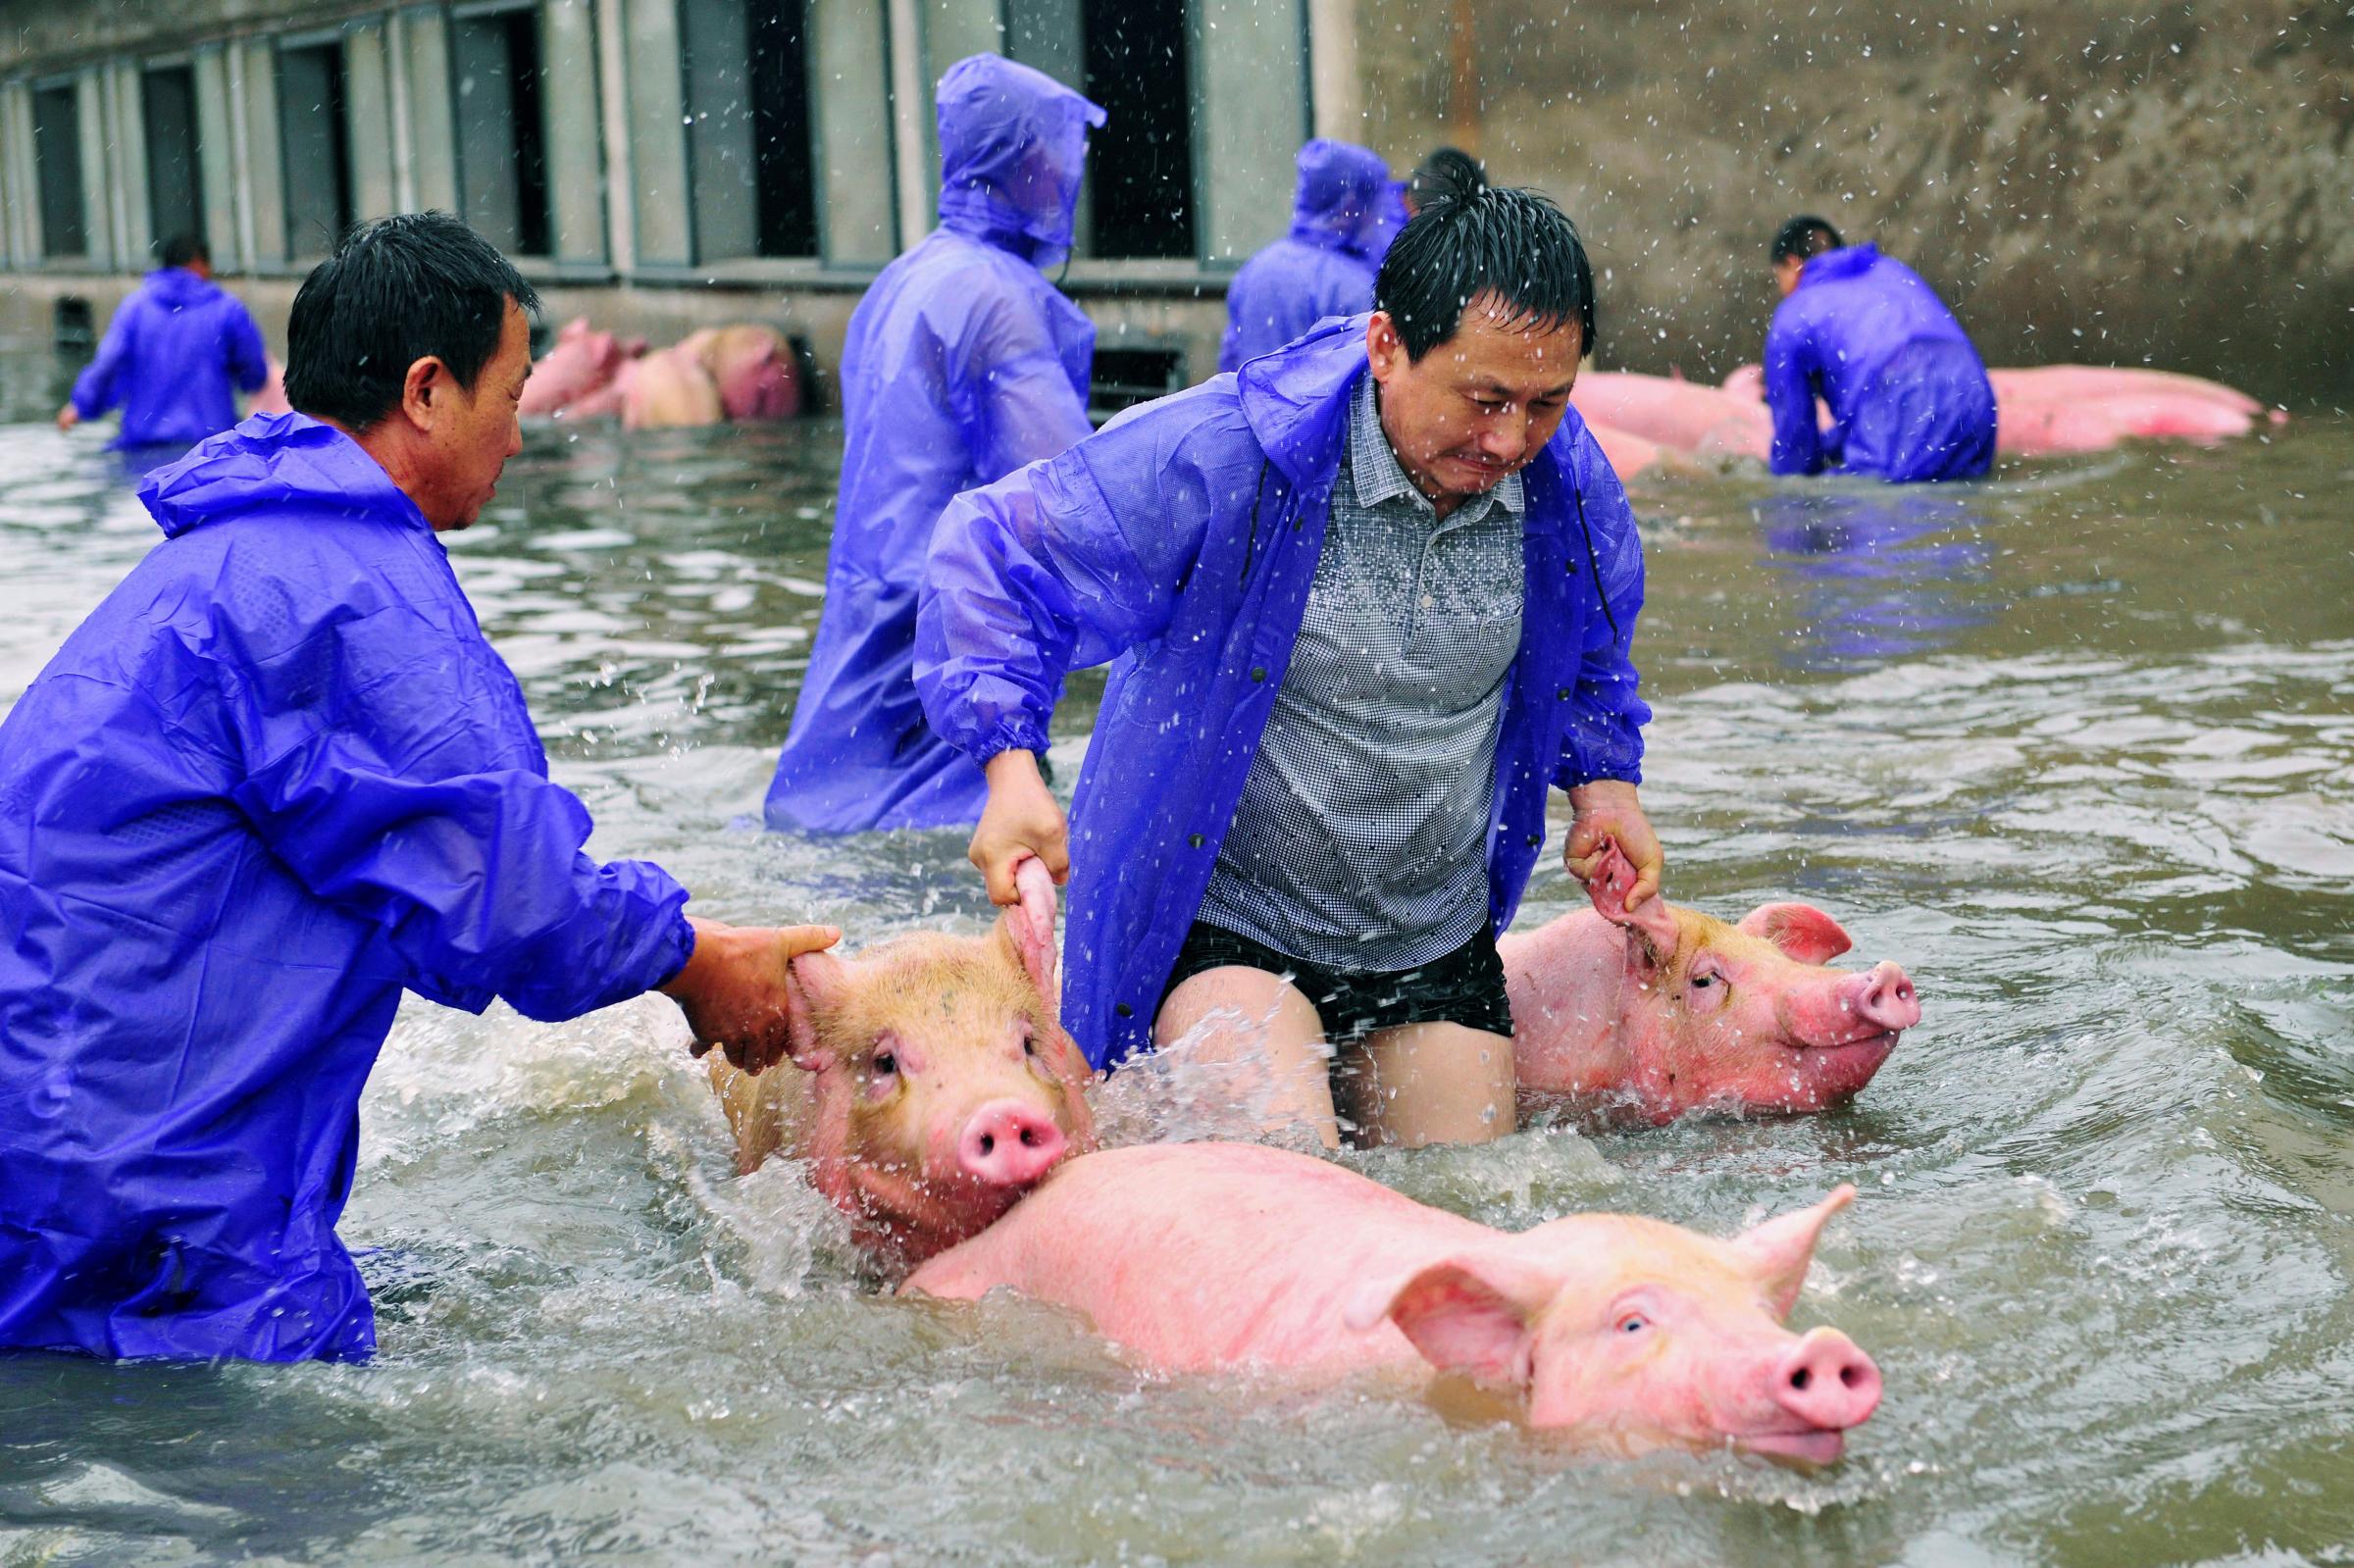 Employees save pigs from a flooded farm in Lu'an, Anhui Province, China, on July 5, 2016.